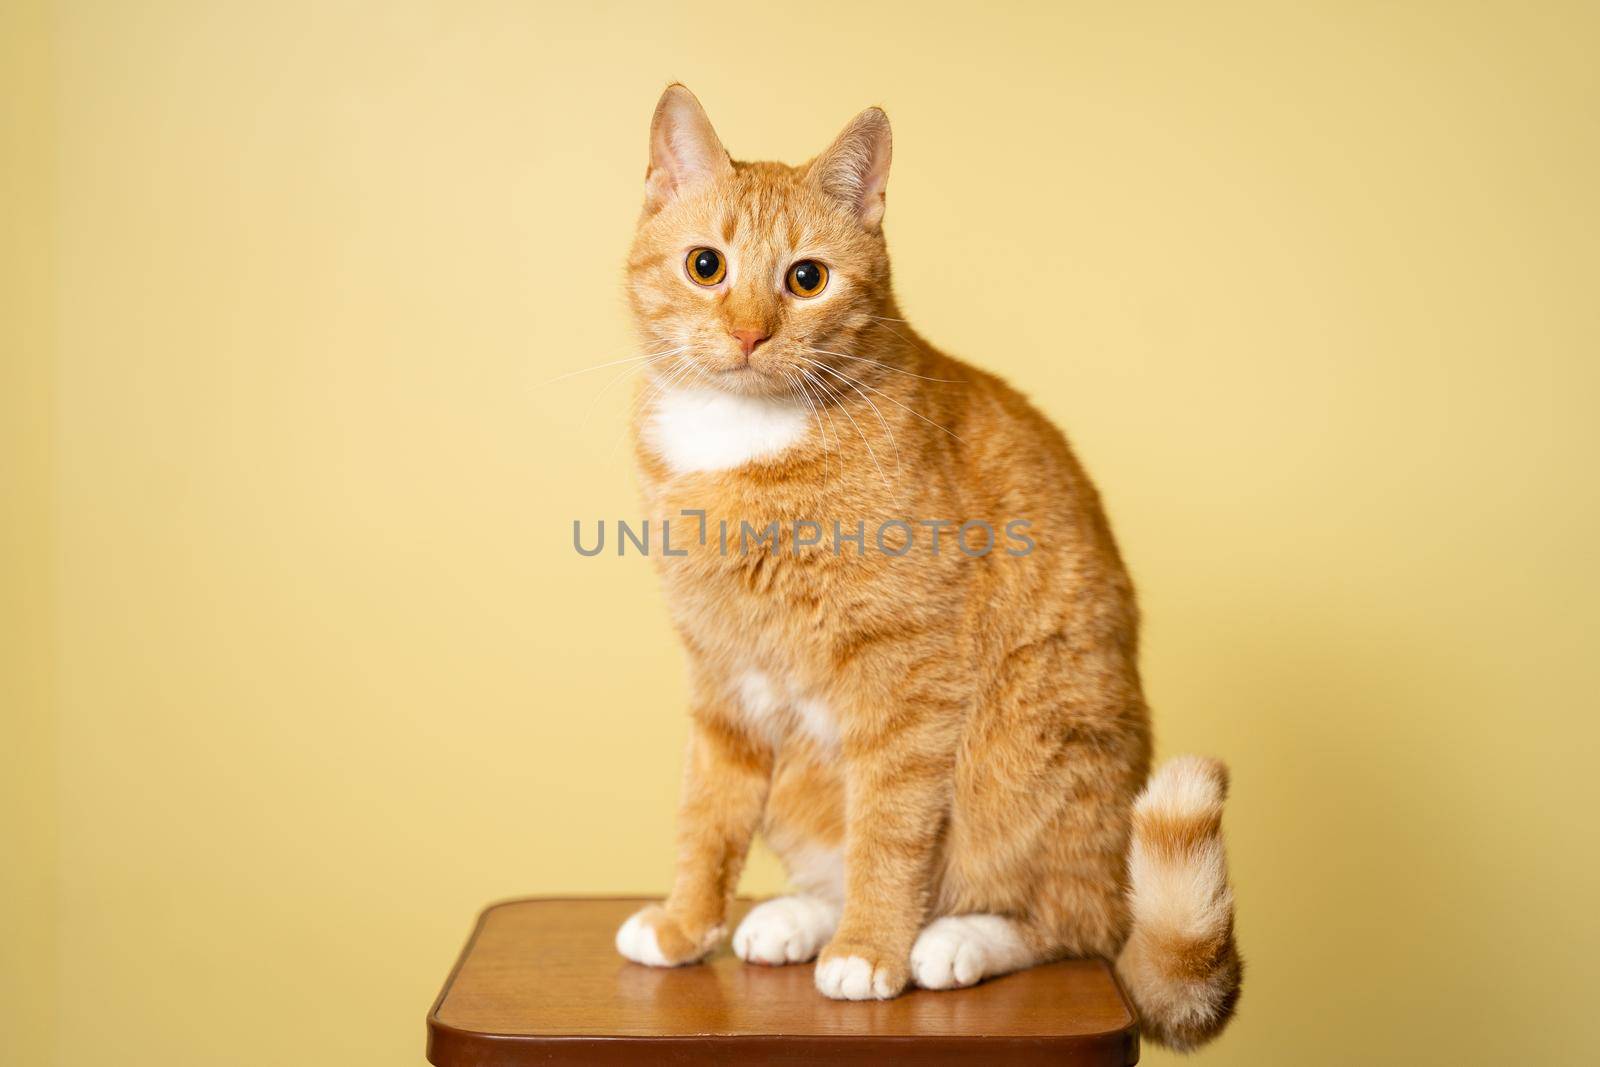 Cute adult red cat with white stripes sits posing on chair in studio against yellow background. Red-haired cat on background of a yellow wall studio shot. Theme pets, love and protection of animals.